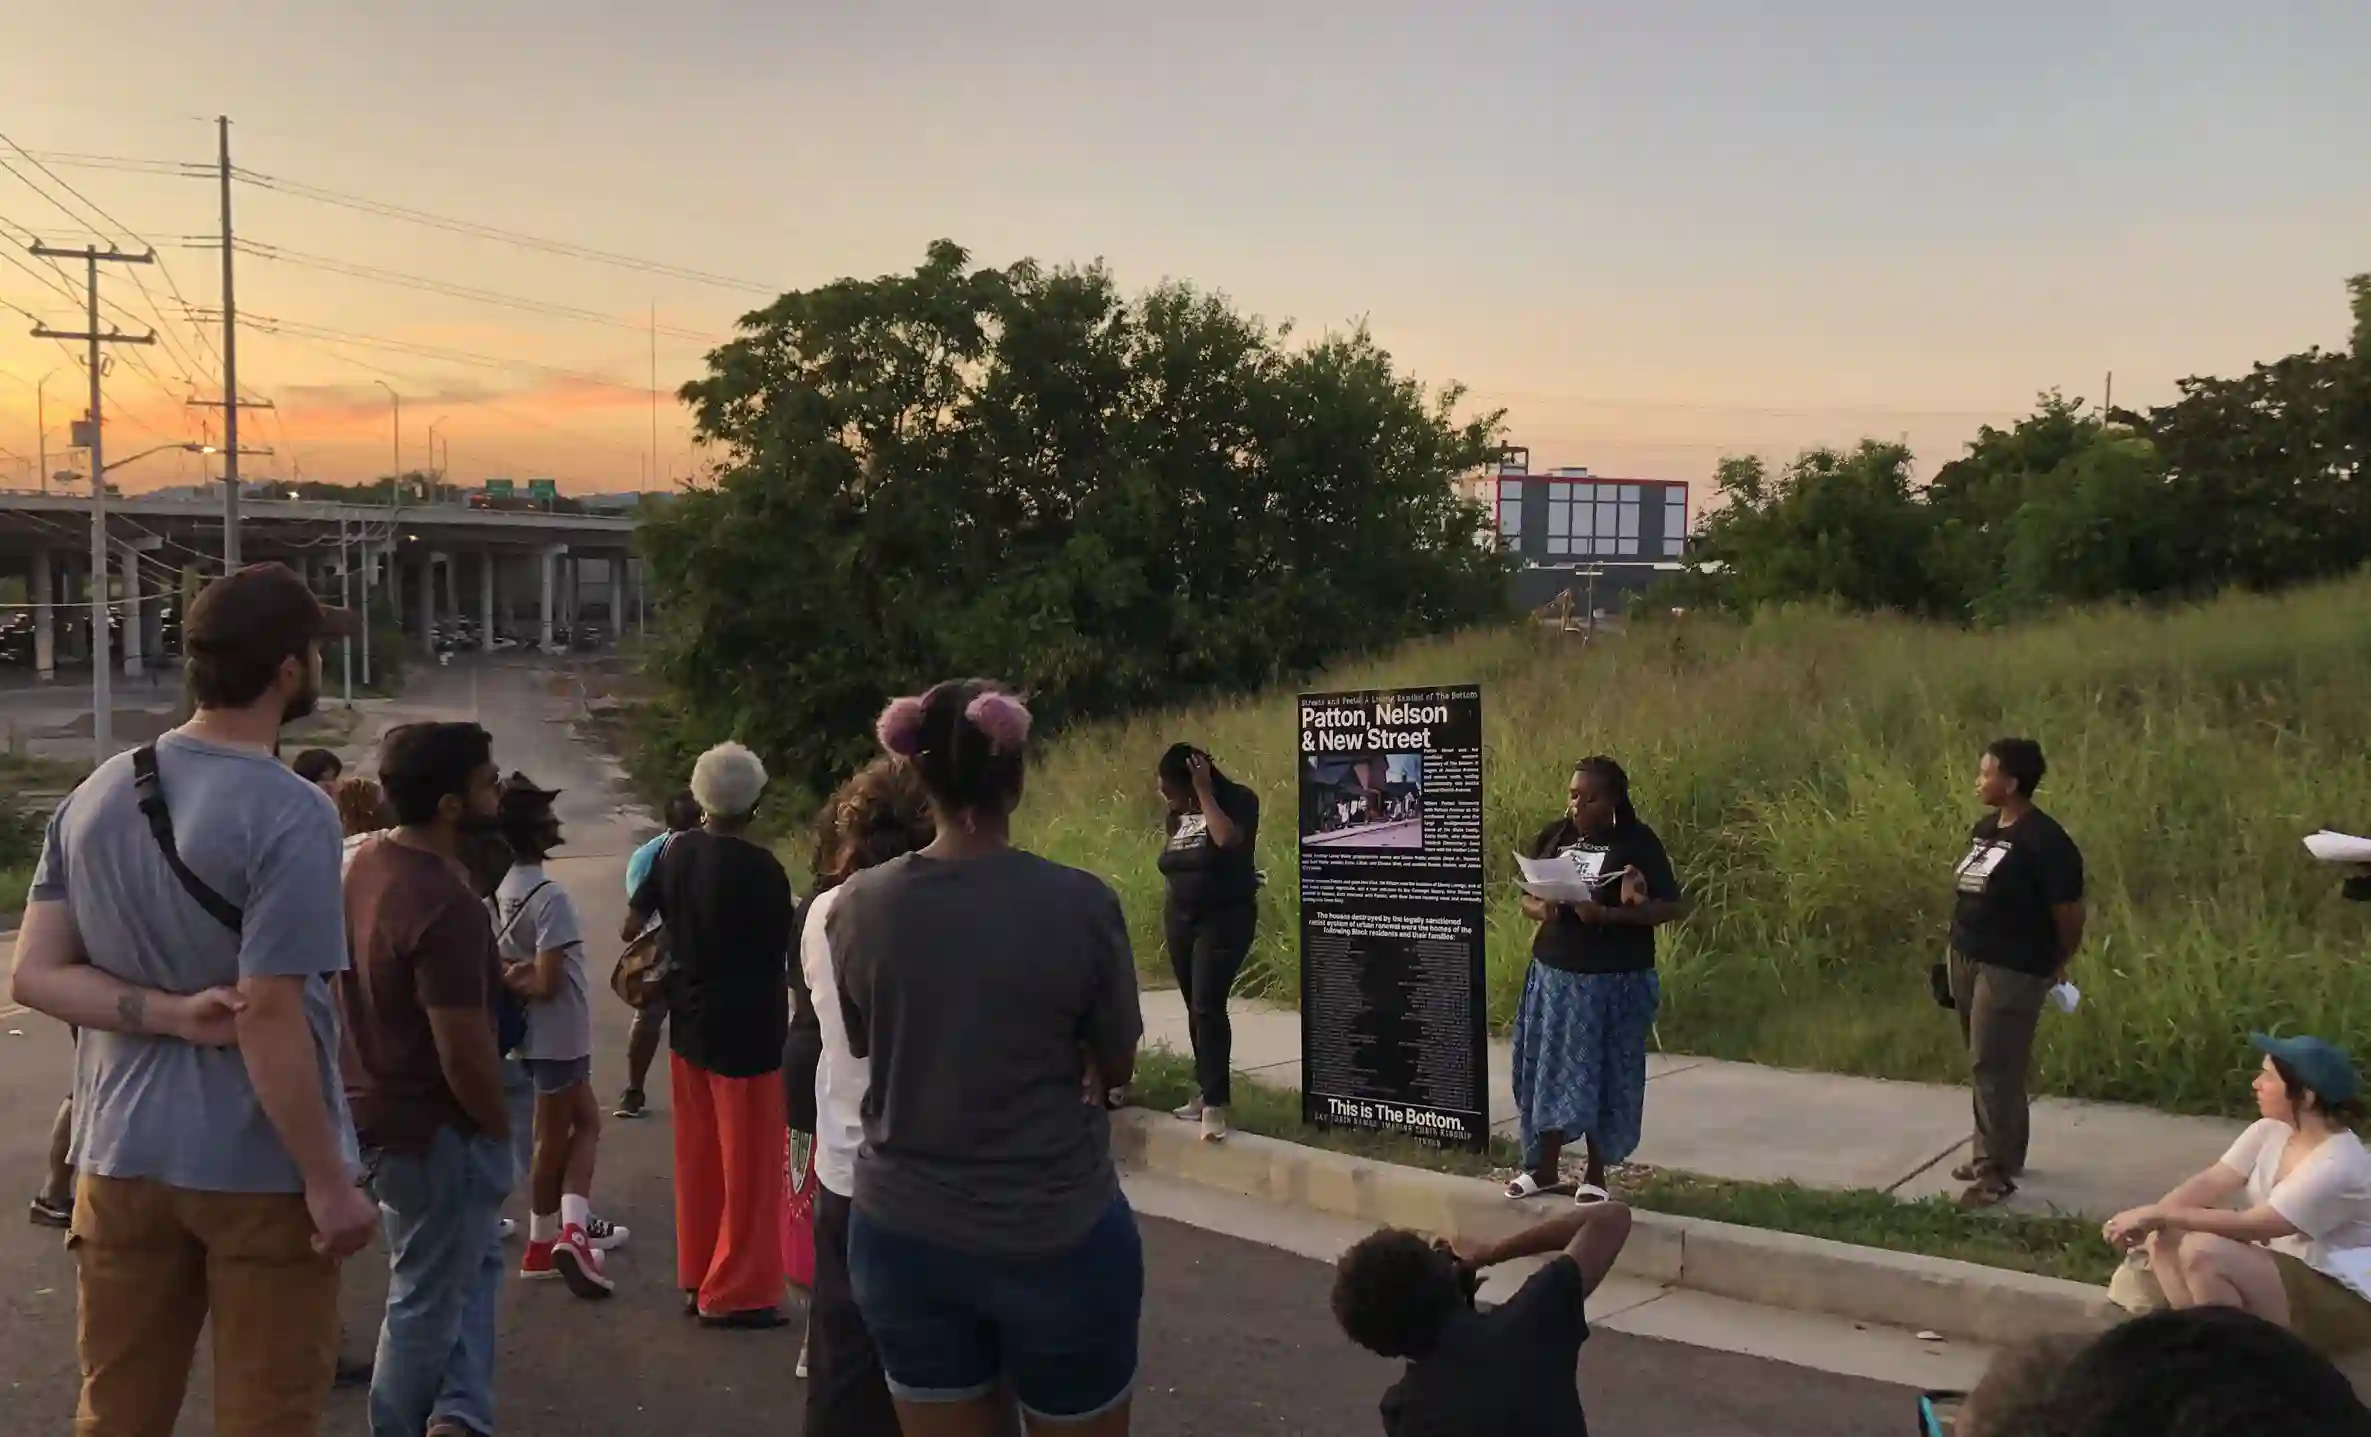 A crowd gathers as the sign is erected in The Bottom, Knoxville, TN an area that was acquisitioned by the city in the 1950s, displacing many Black families